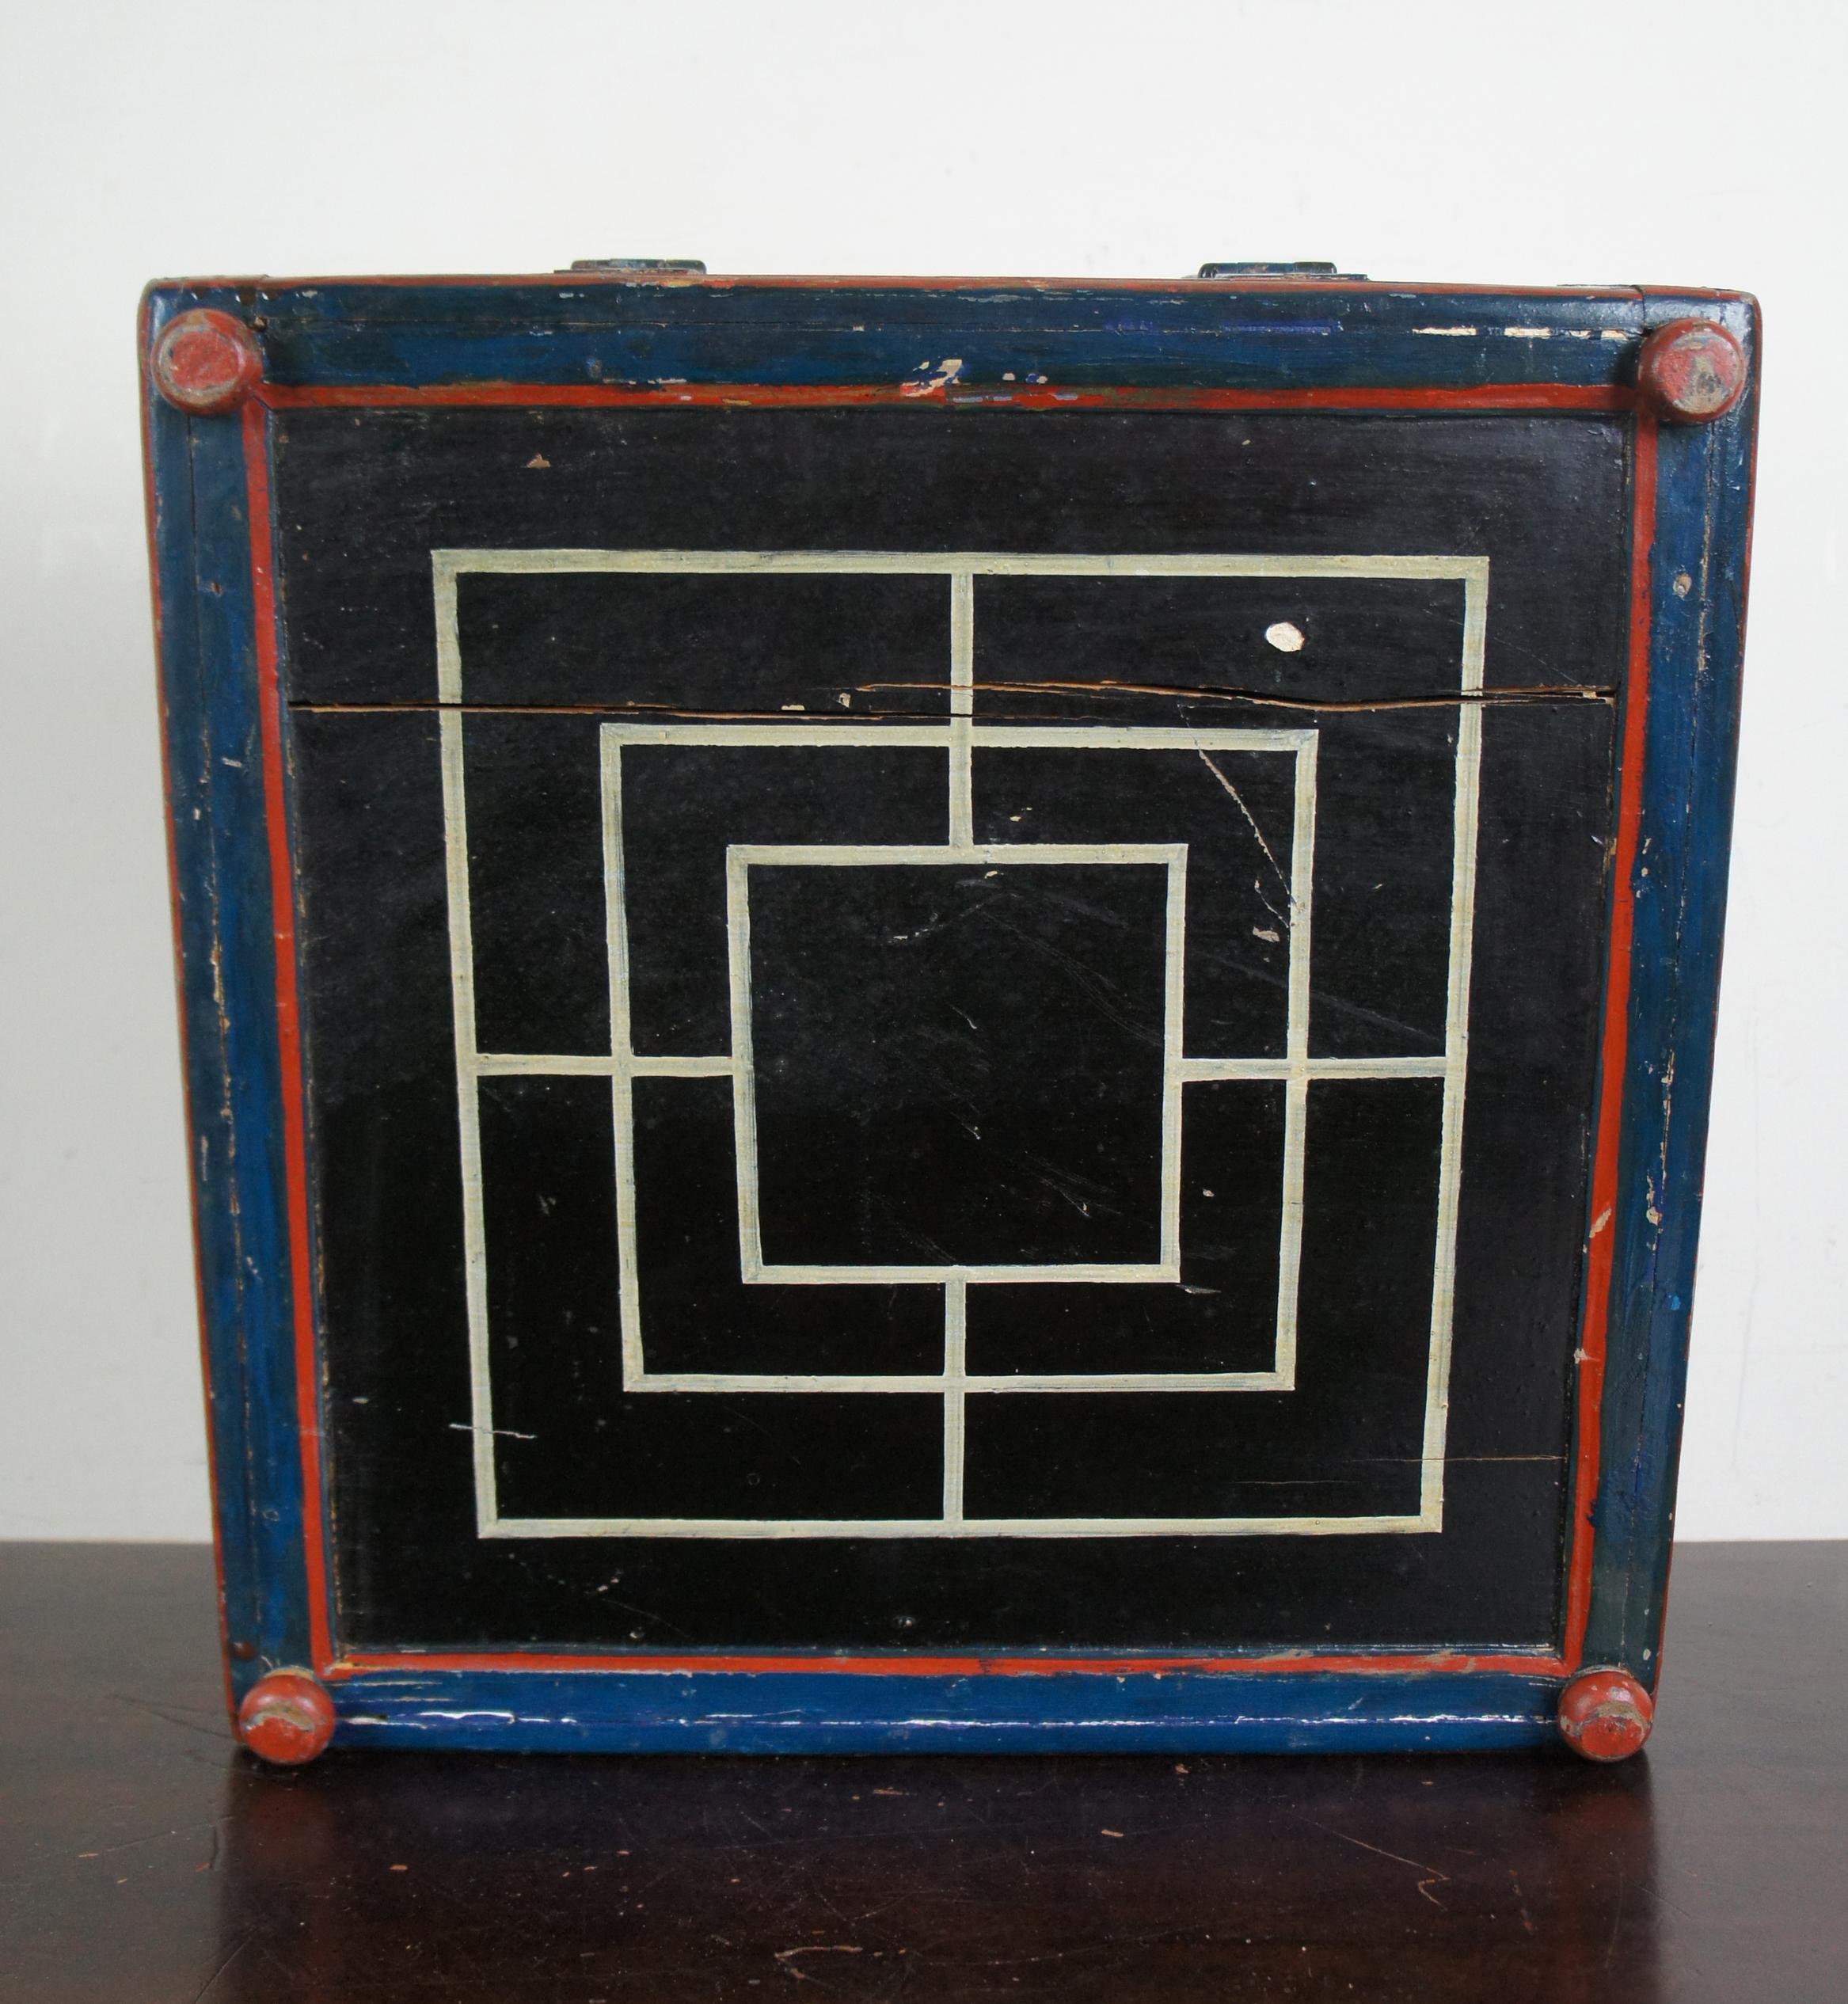 1817 Antique Painted Chess Backgammon Checkers Game Board Folk Art Primitive 3